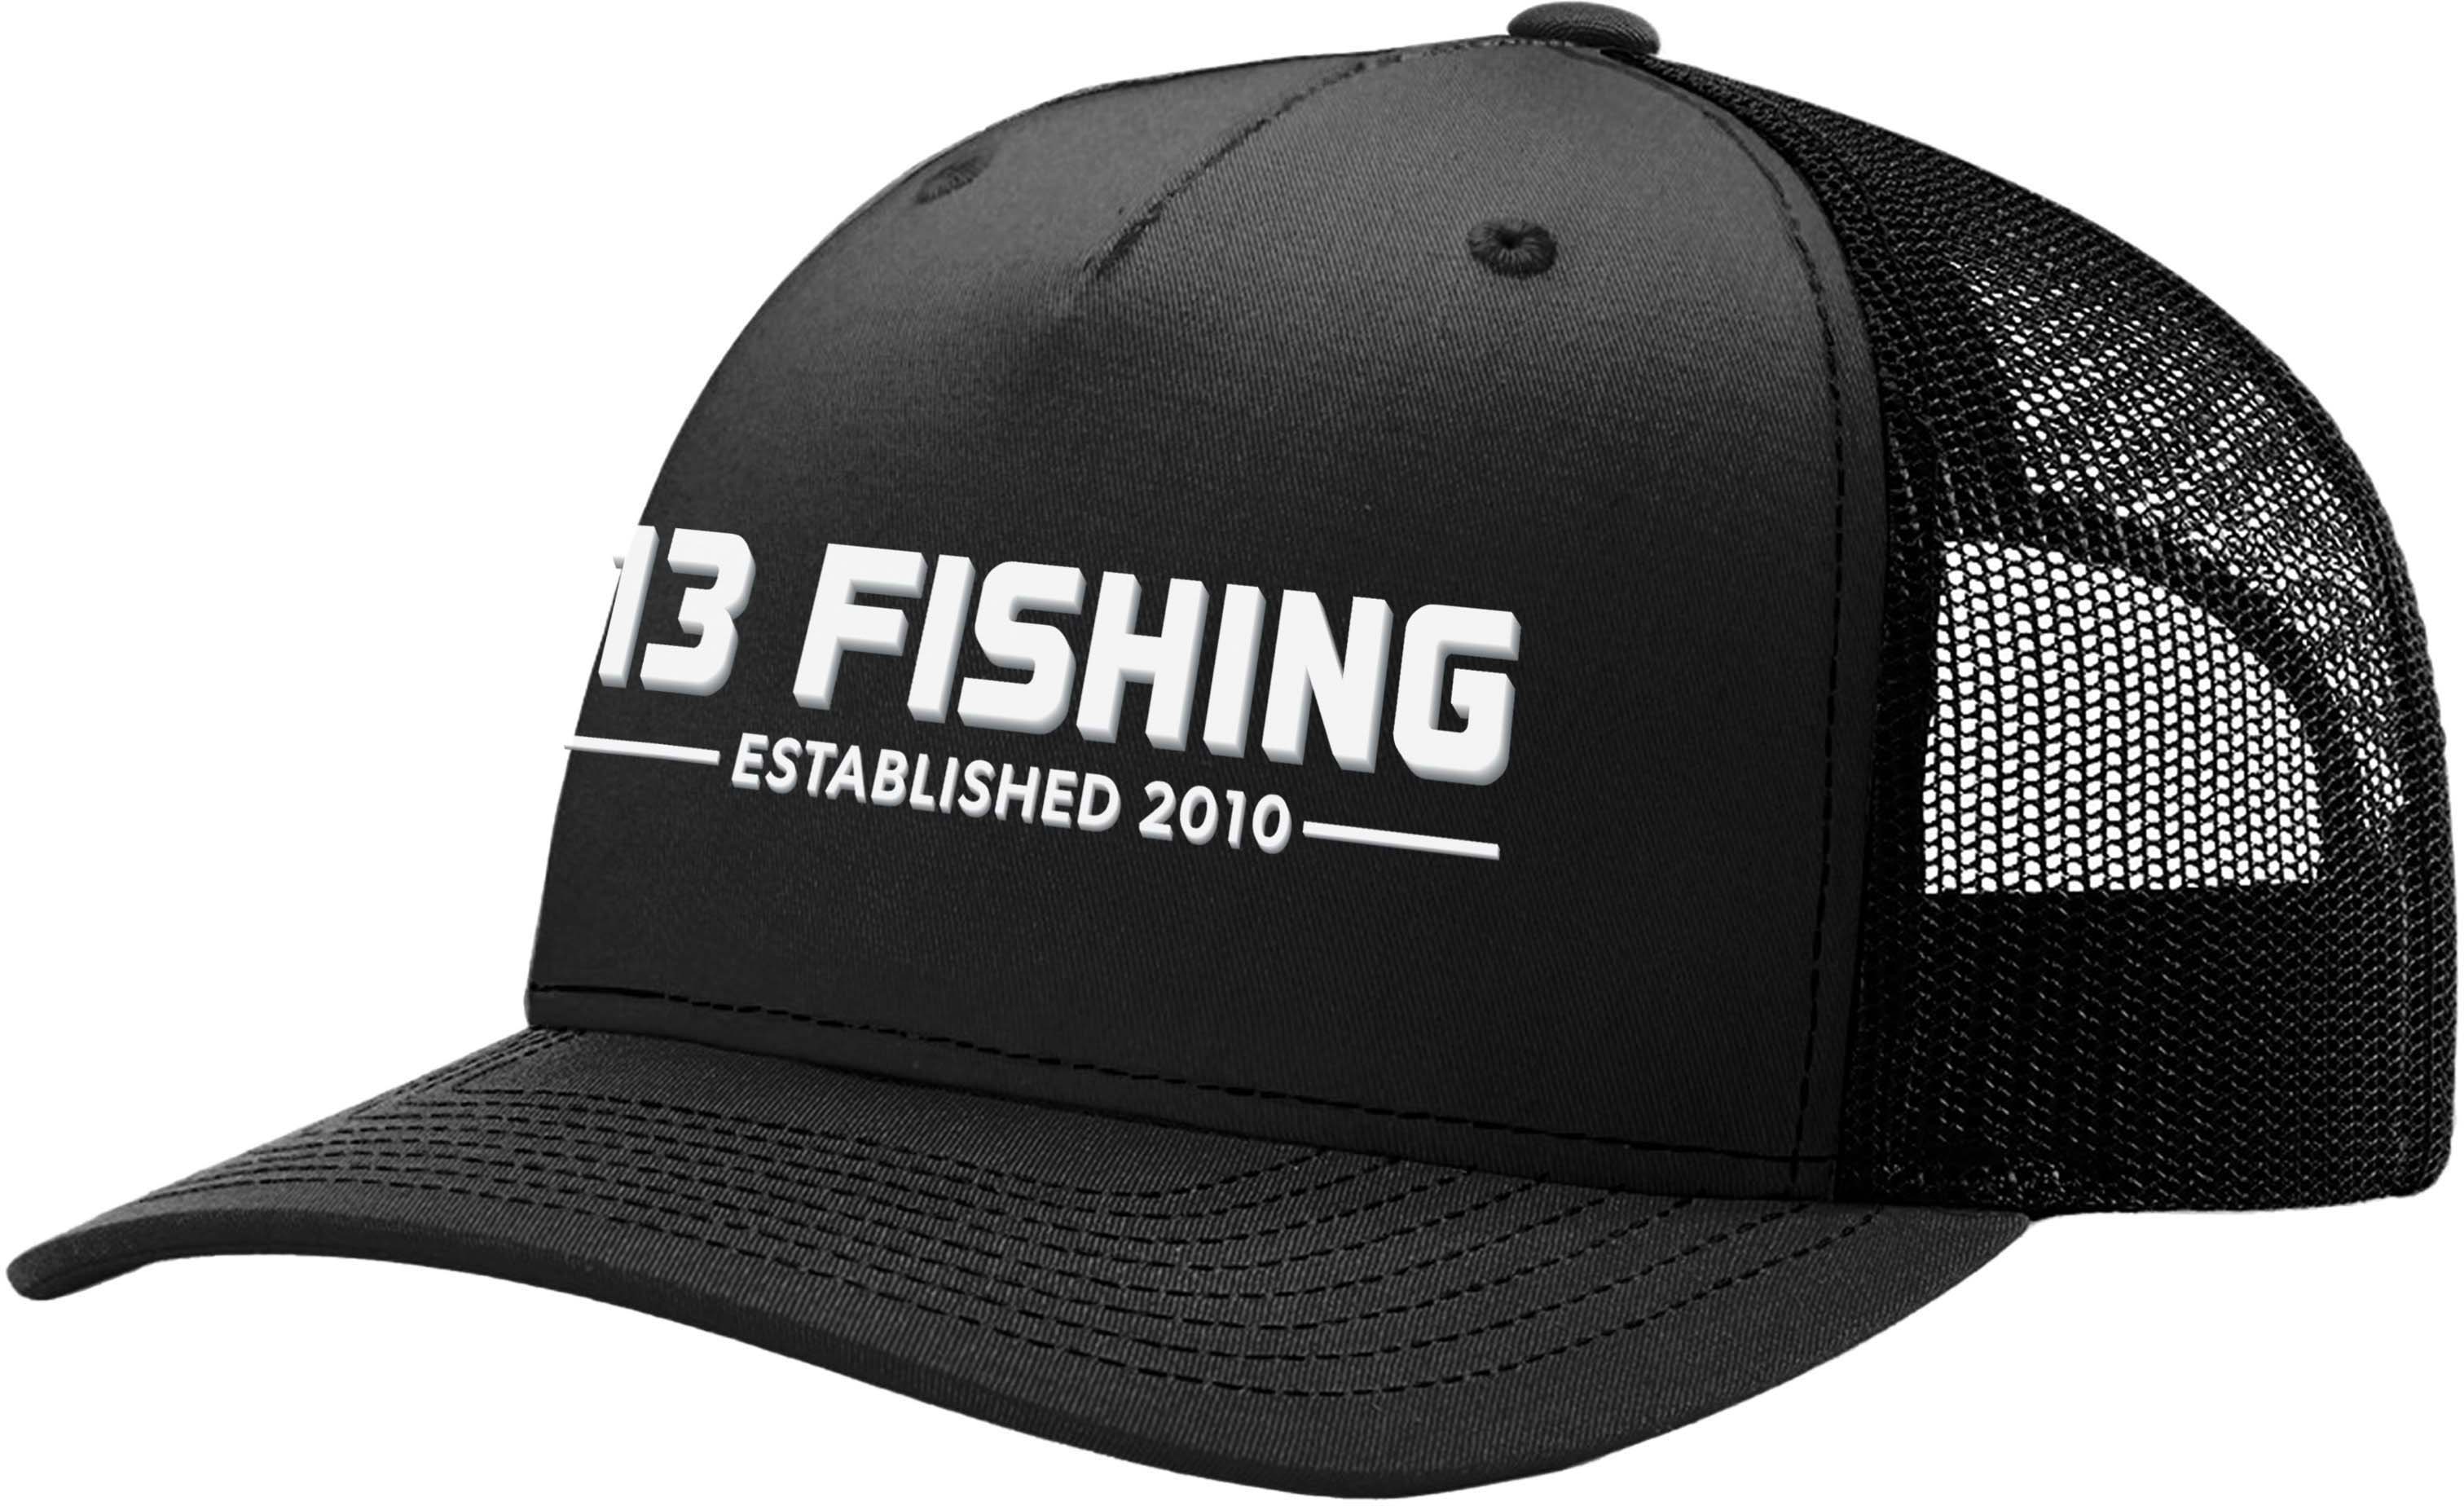 13 Fishing FACEPUNCH-SNP Face Punch Snapback Hat, One Size